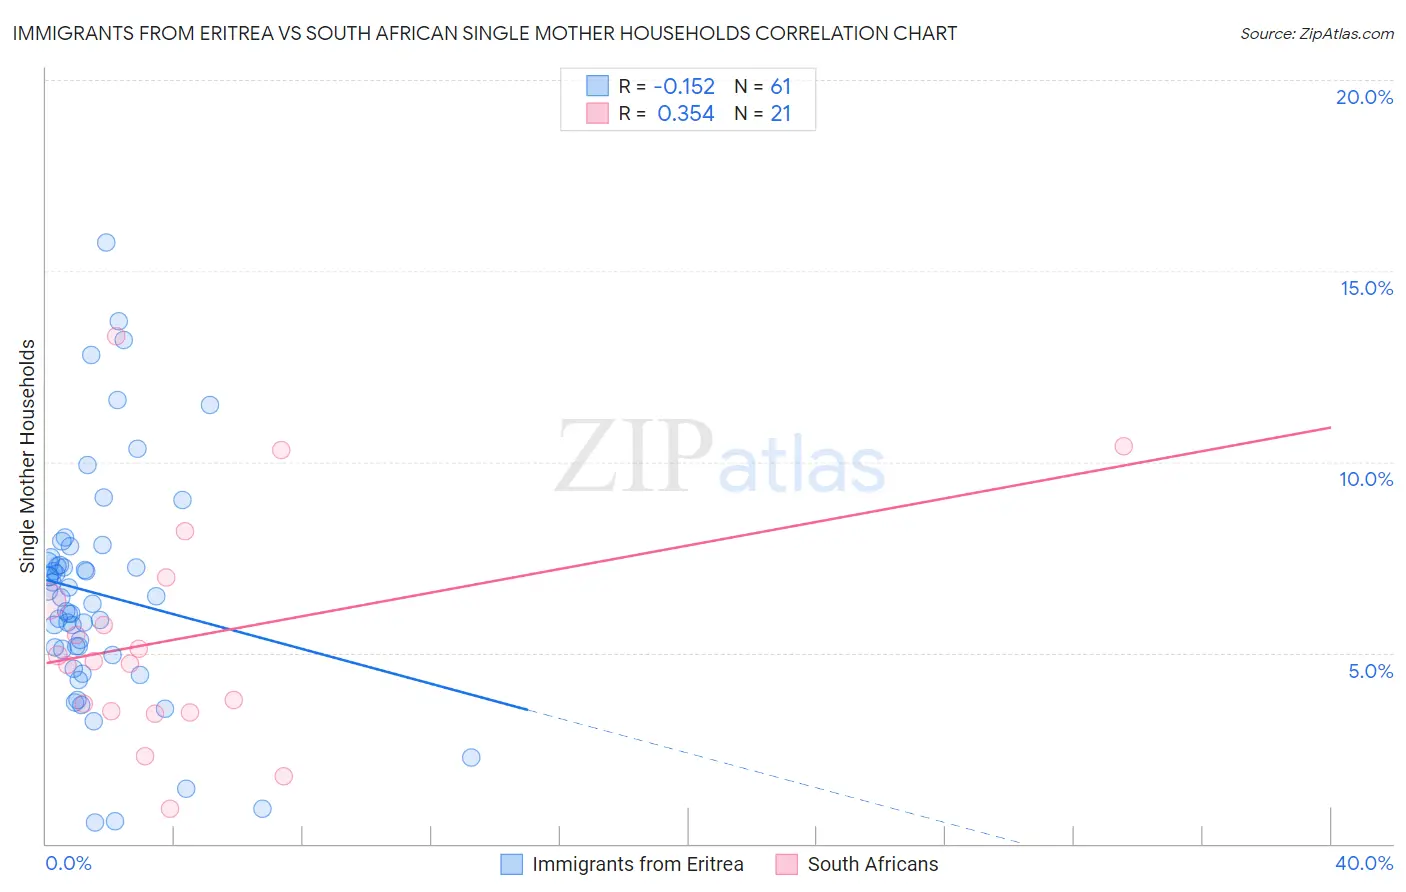 Immigrants from Eritrea vs South African Single Mother Households